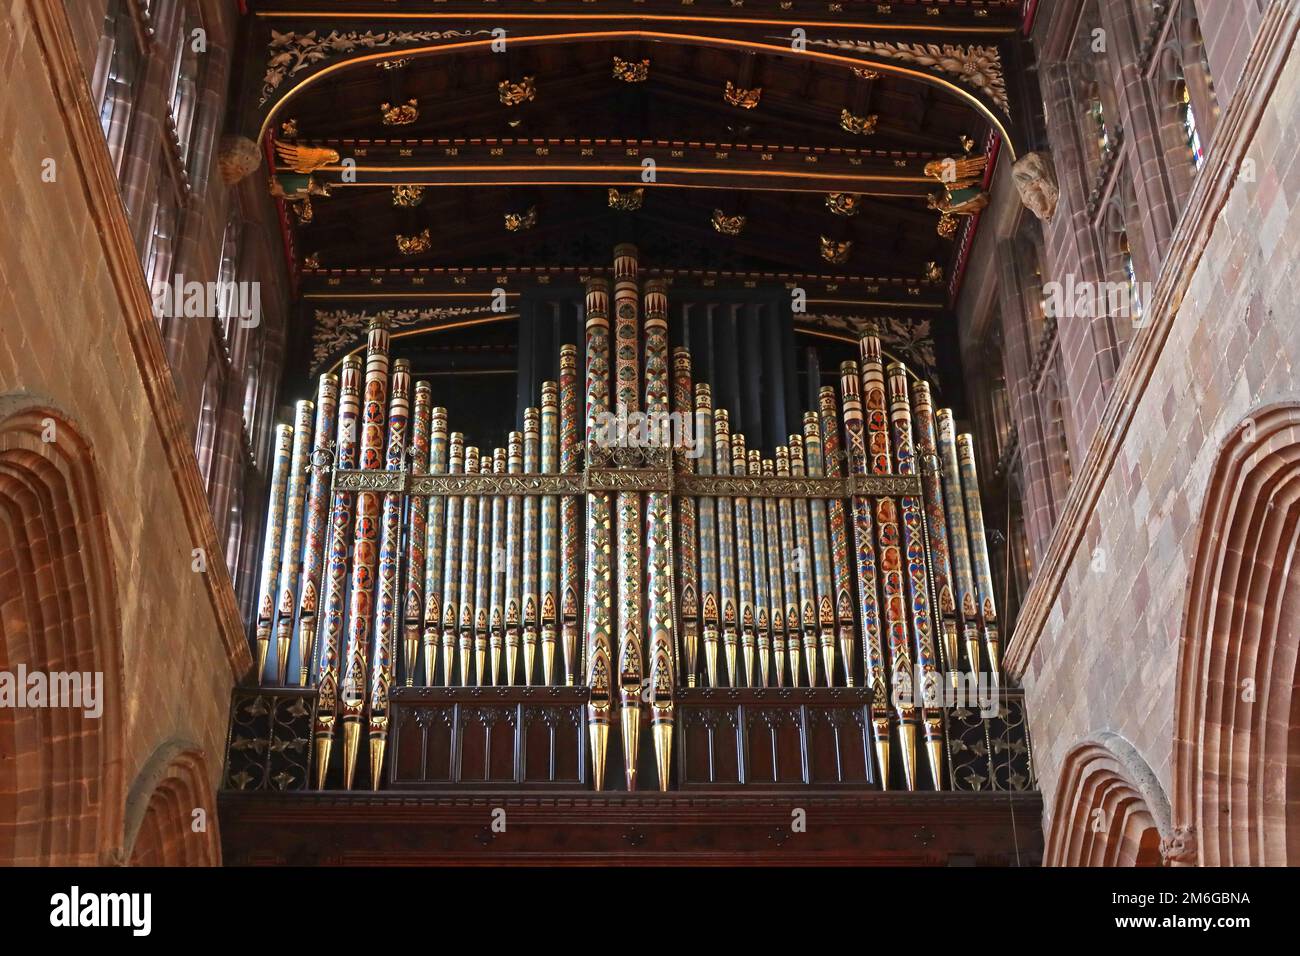 Organ pipes, St Peters Collegiate Church, Lich Gate, Wolverhampton, West Midlands, England, UK, WV1 1TY Stock Photo